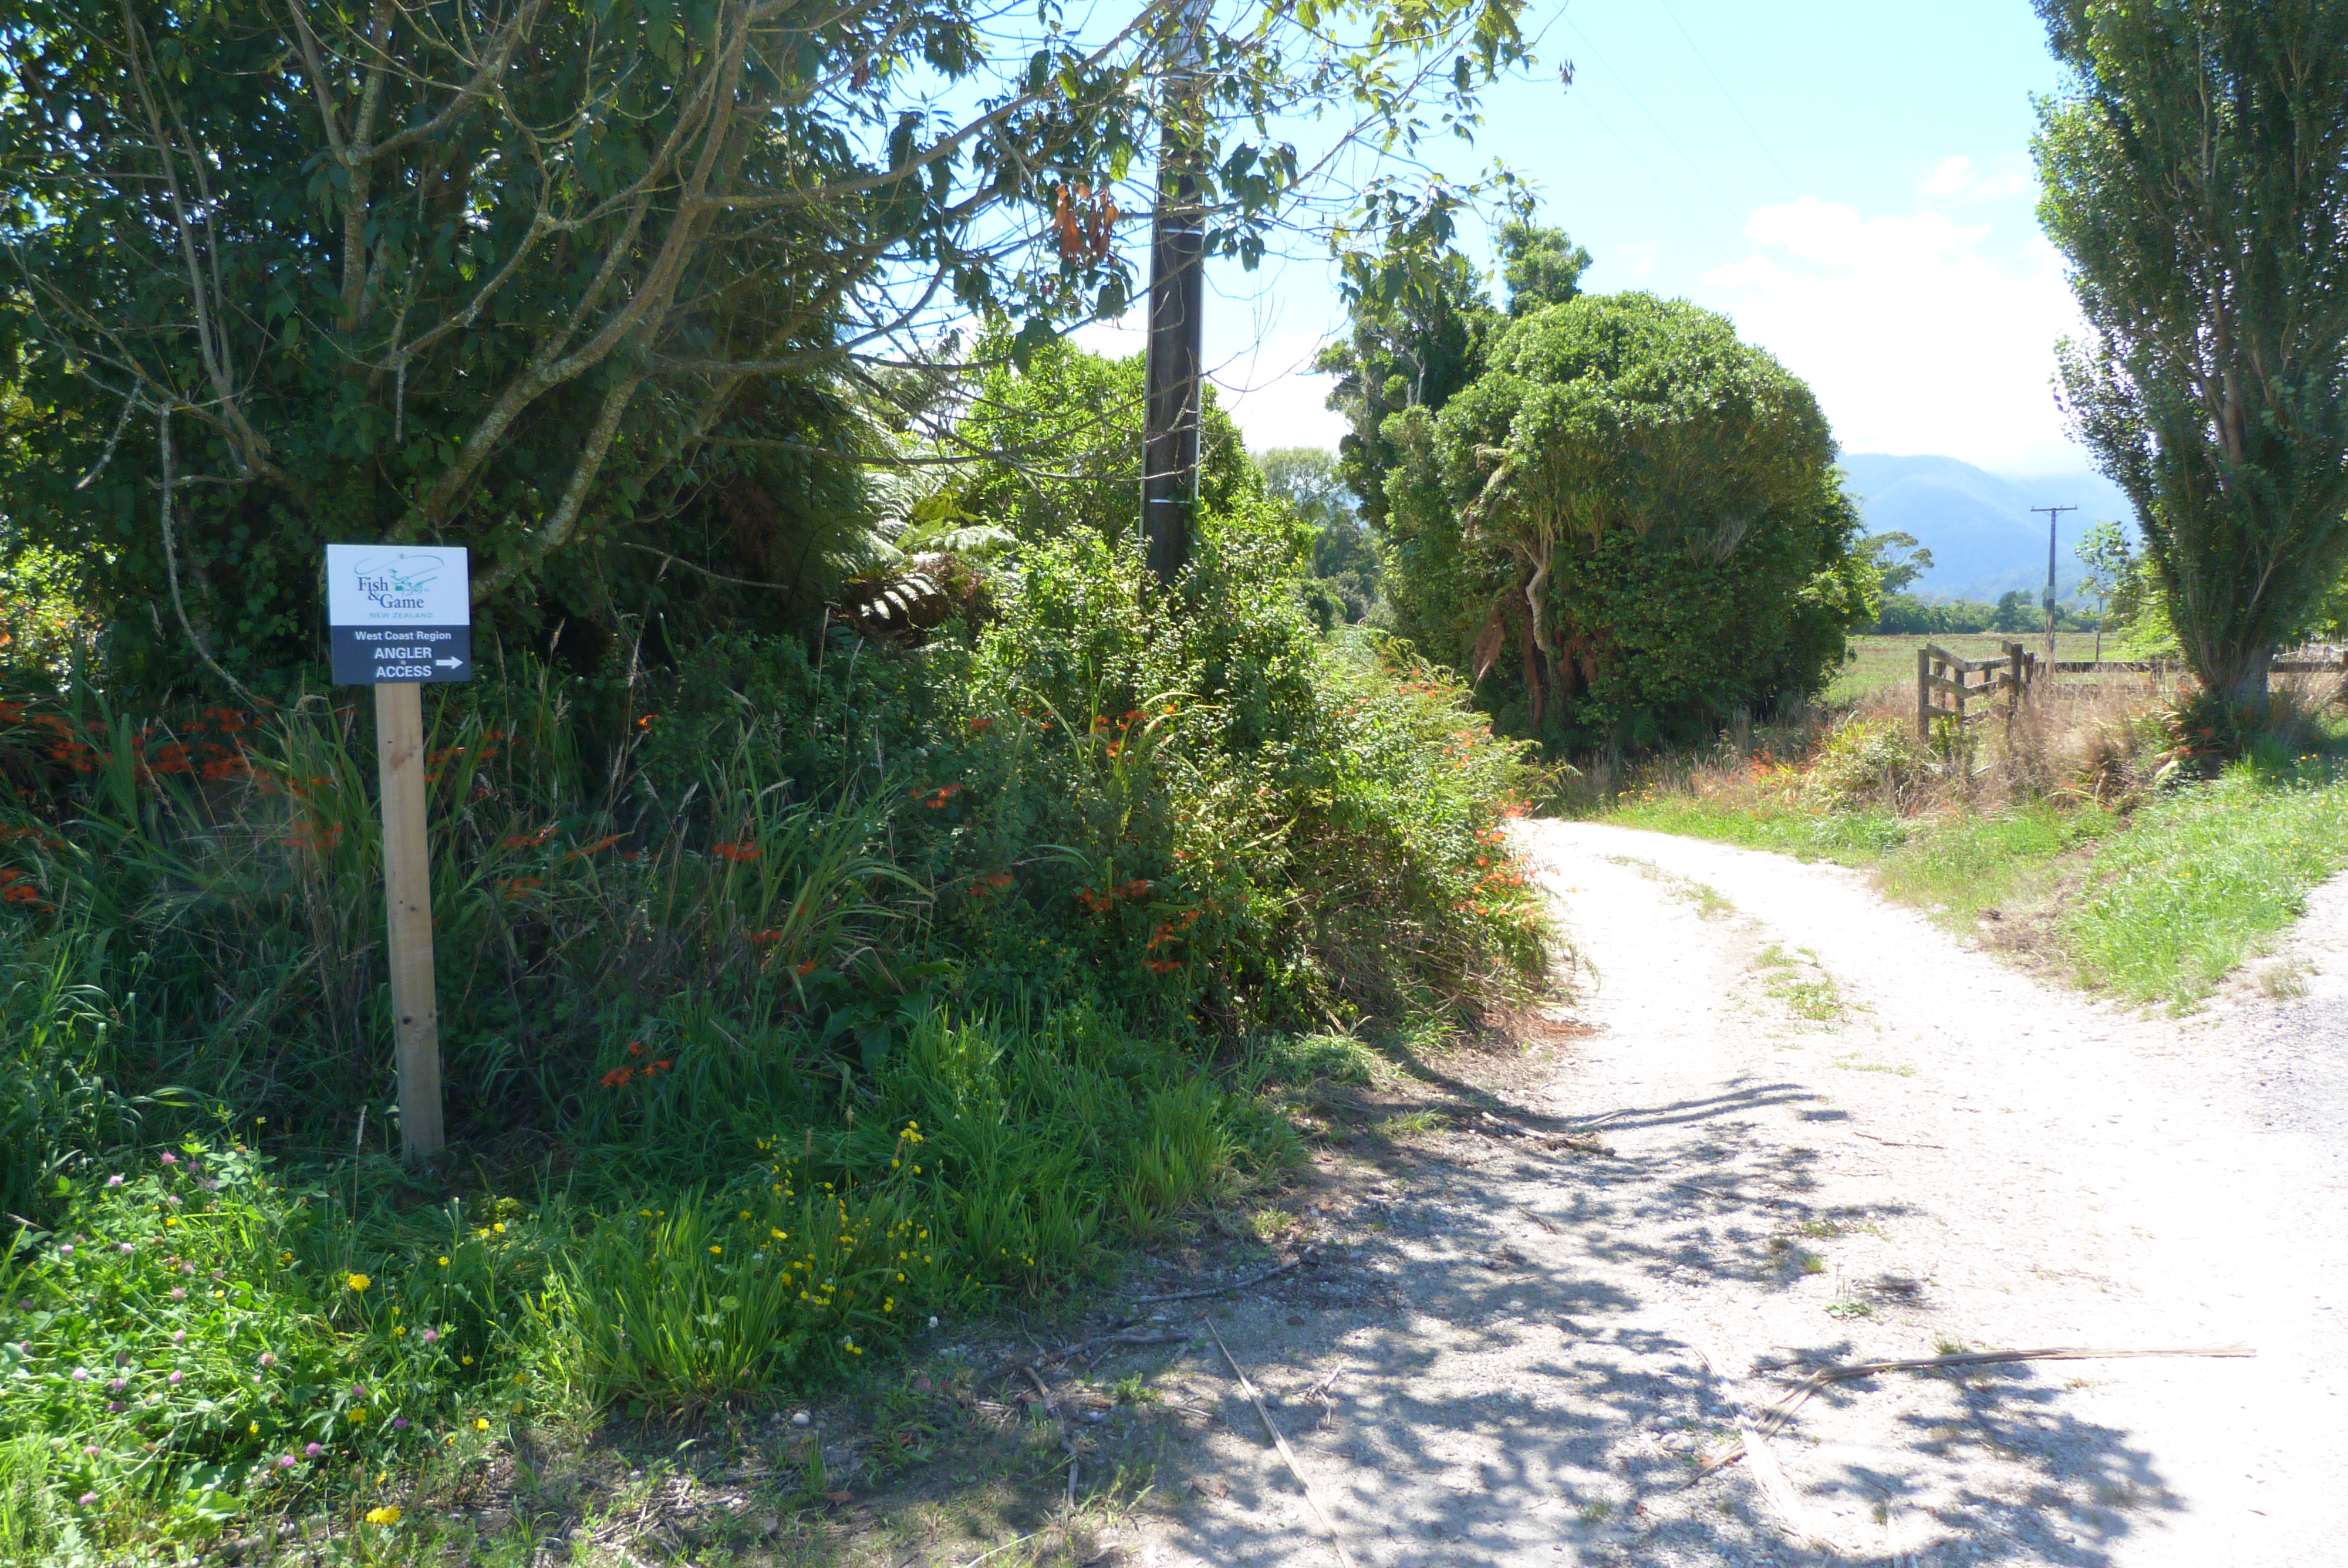 One Of The New Angler Access Points To The Lower Karamea River